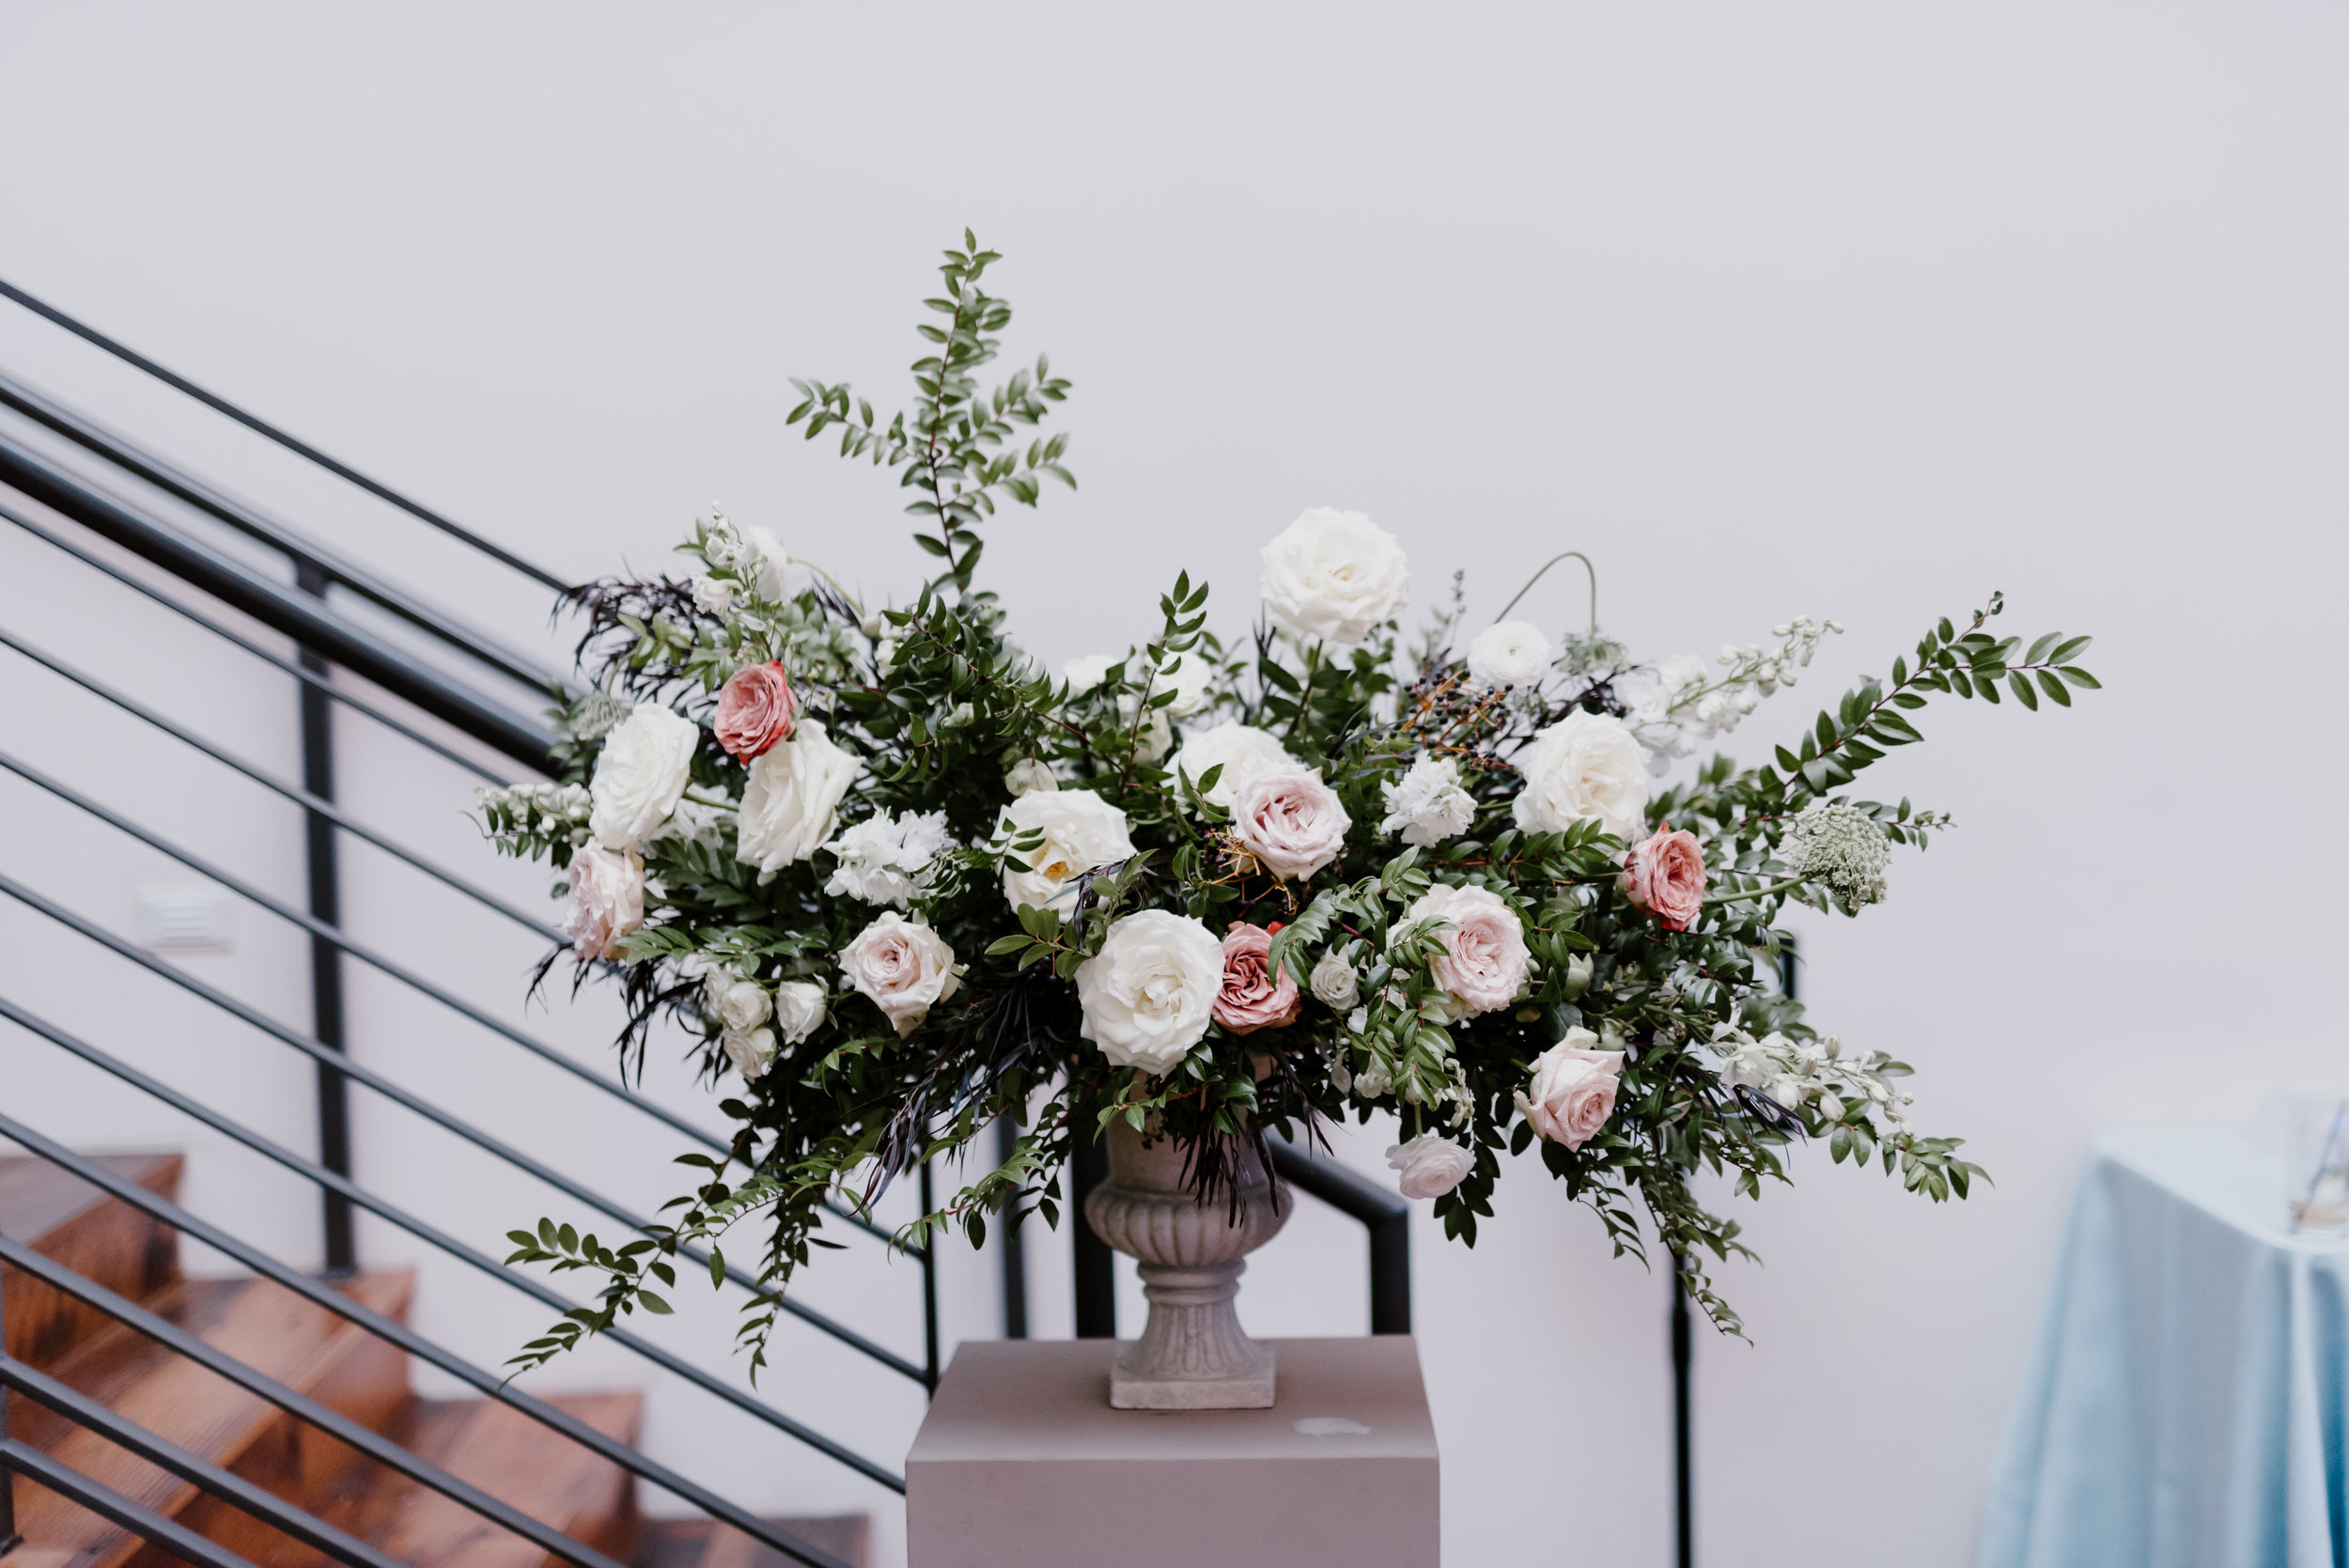 Statement floral arrangement with white flowers, hints of blush and neutrals, and organic greenery // Nashville Floral Designer